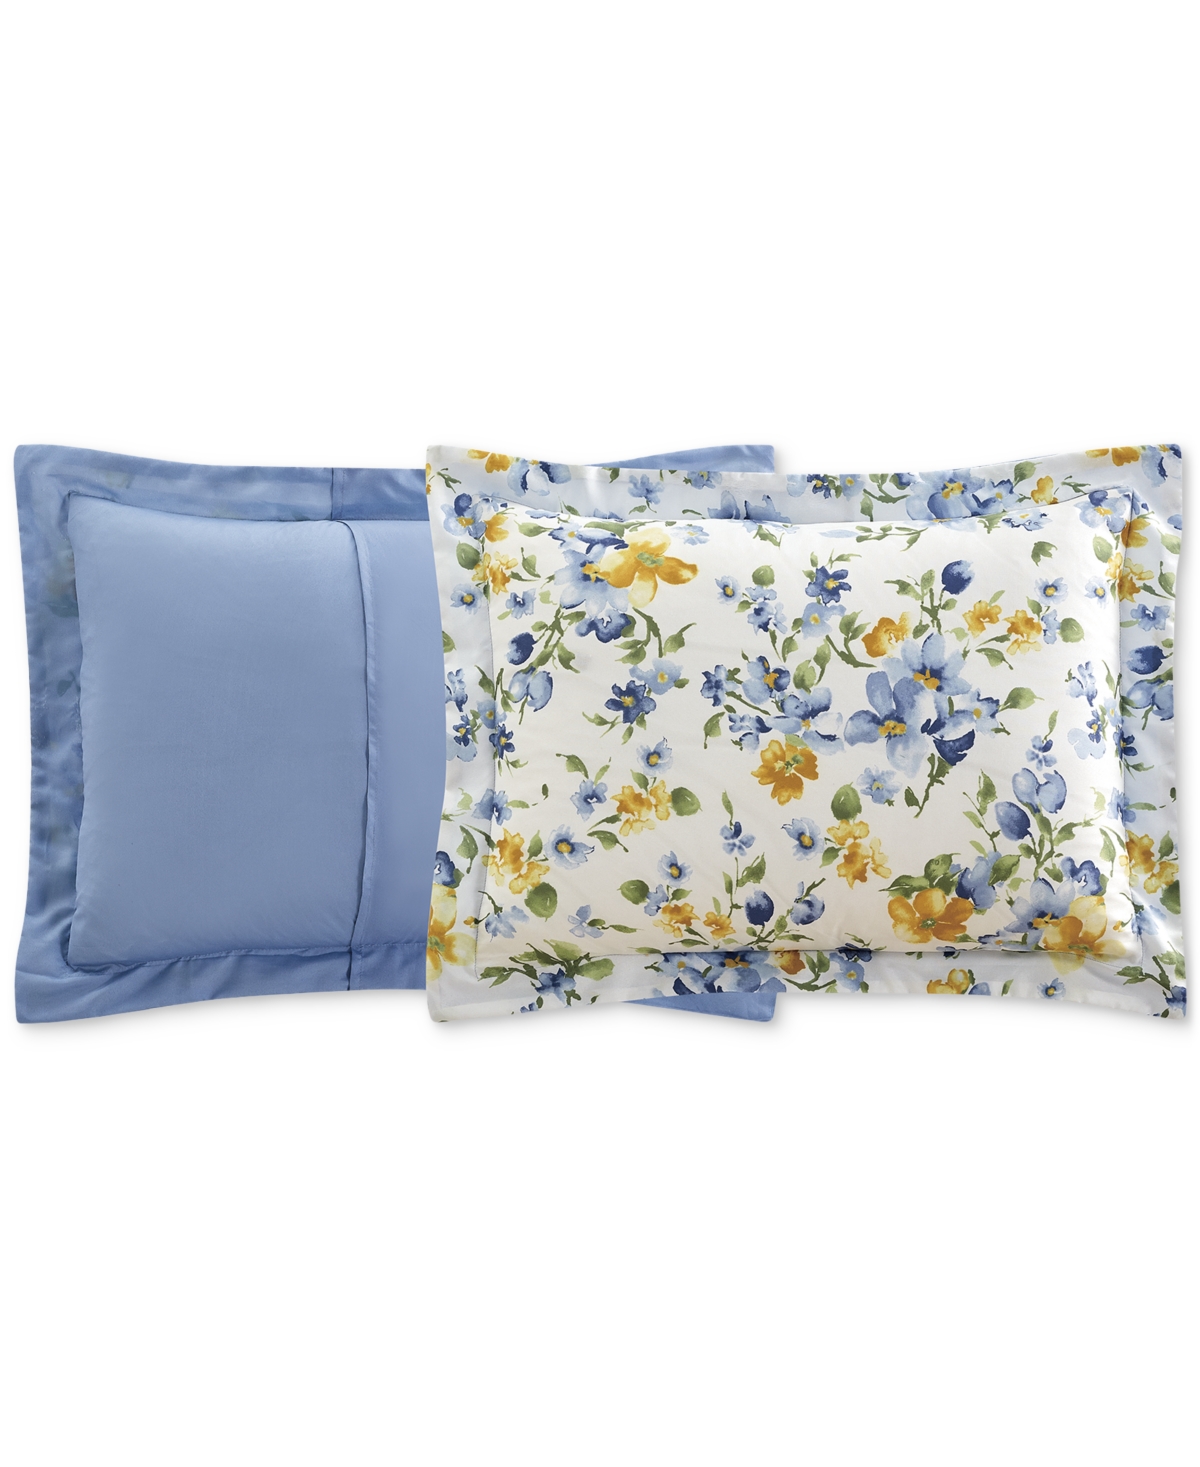 Shop Sunham Kinsely 8-pc. Comforter Set, Created For Macy's In Blue